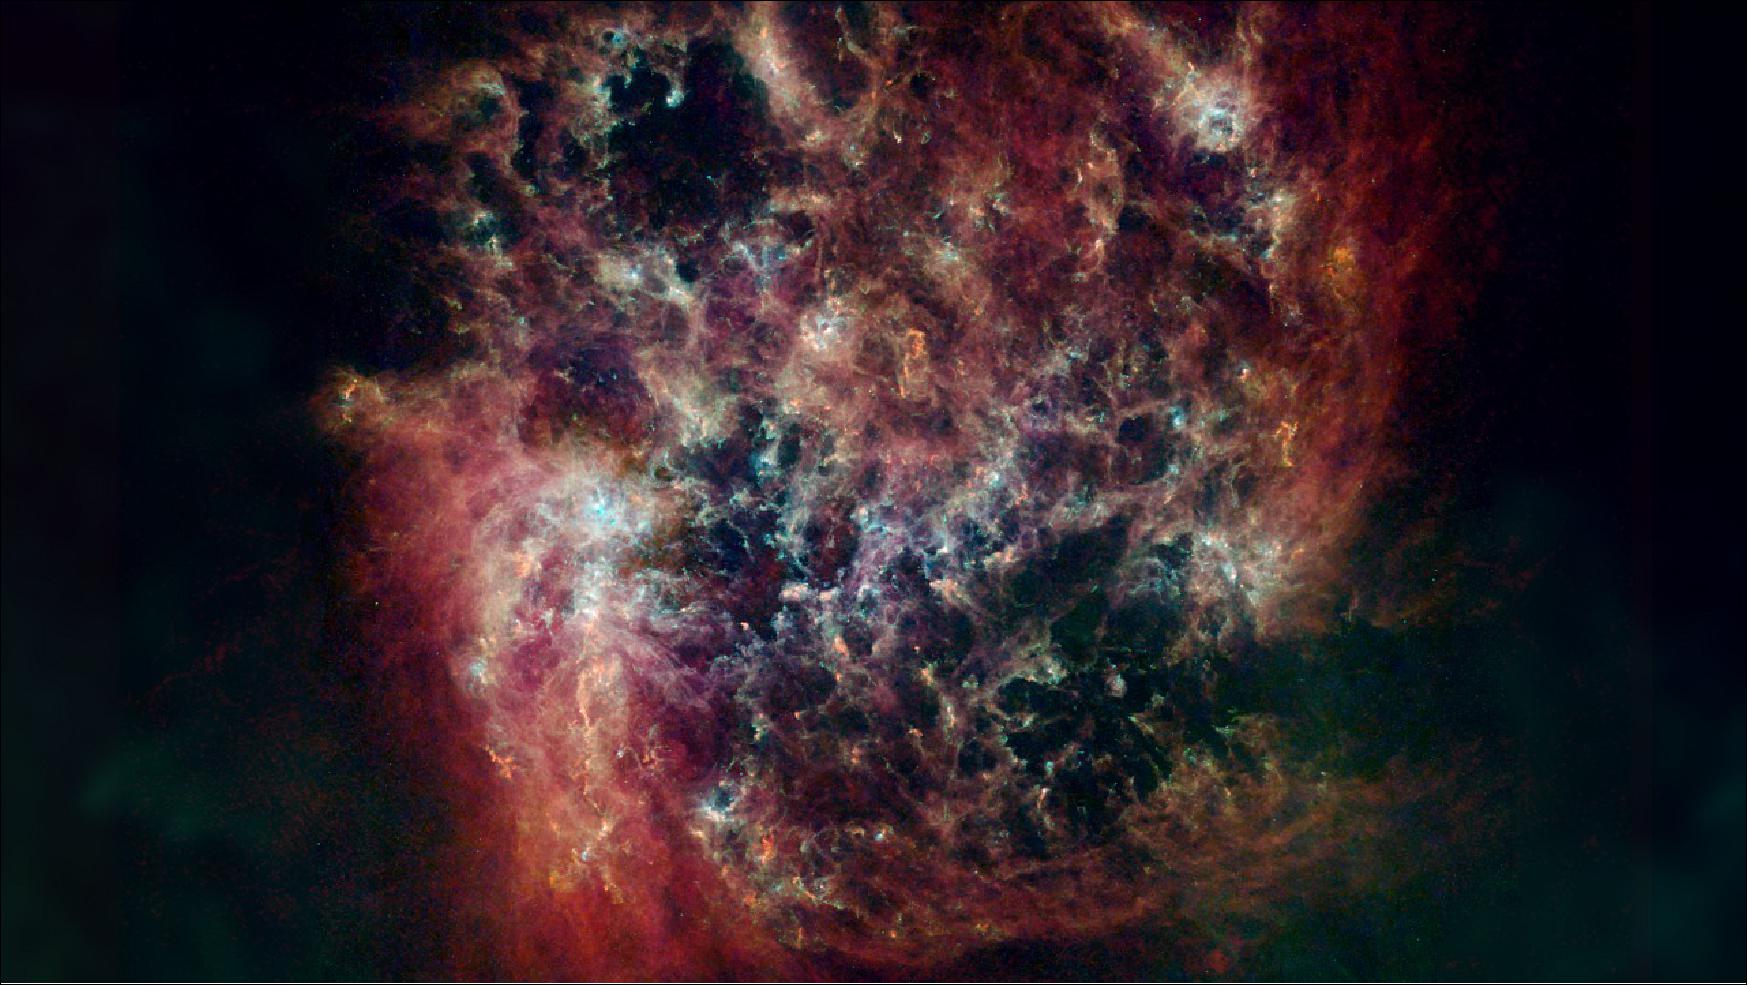 Figure 17: The Large Magellanic Cloud (LMC) is a satellite of the Milky Way, containing about 30 billion stars. Seen here in a far-infrared and radio view, the LMC’s cool and warm dust are shown in green and blue, respectively, with hydrogen gas in red. The image is composed of data from the European Space Agency (ESA) Herschel Space Observatory (HSO), supplemented with data from ESA’s retired Planck observatory and two retired NASA missions: the Infrared Astronomy Survey and Cosmic Background Explorer, as well as the Parkes, ATCA, and Mopra radio telescopes [image credits: ESA, NASA, NASA-JPL, Caltech, Christopher Clark (STScI), S. Kim (Sejong University), T. Wong (UIUC)]